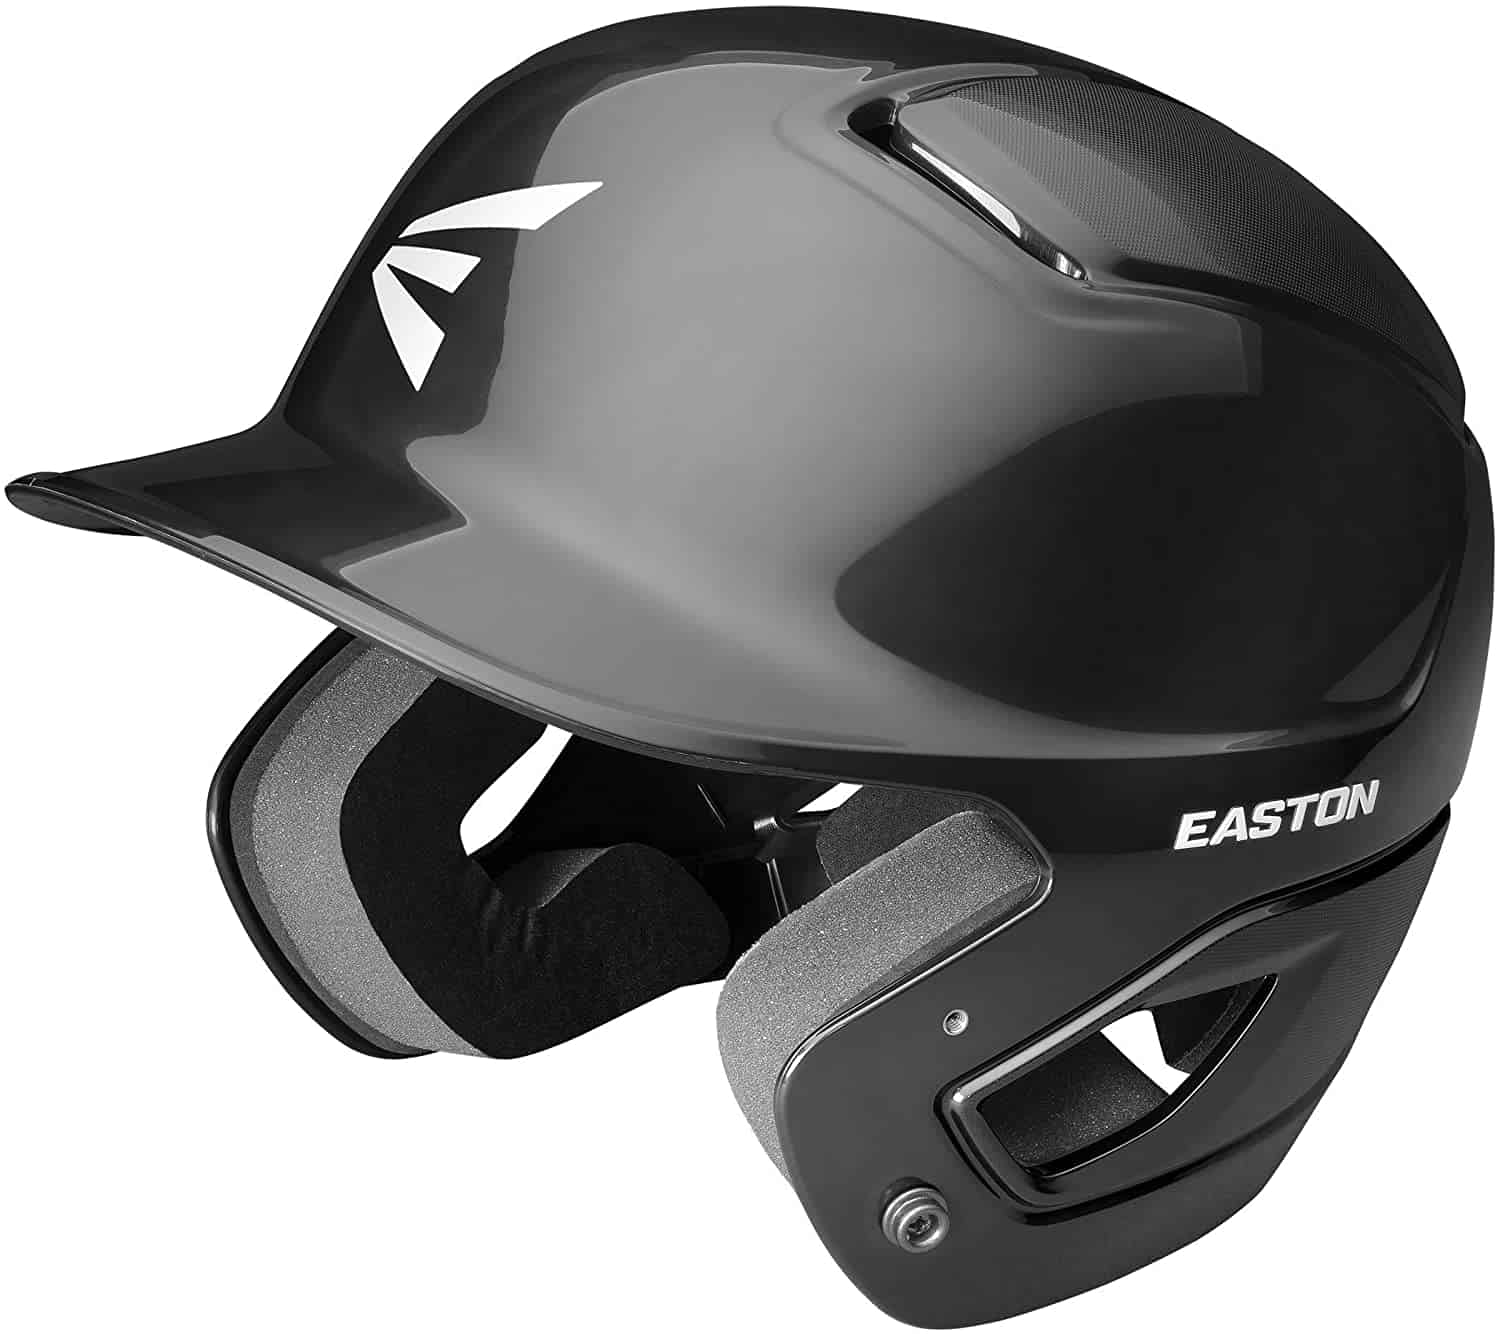 Best Baseball Helmet for Youth In 2022 – (Reviews & Buying Guide) |